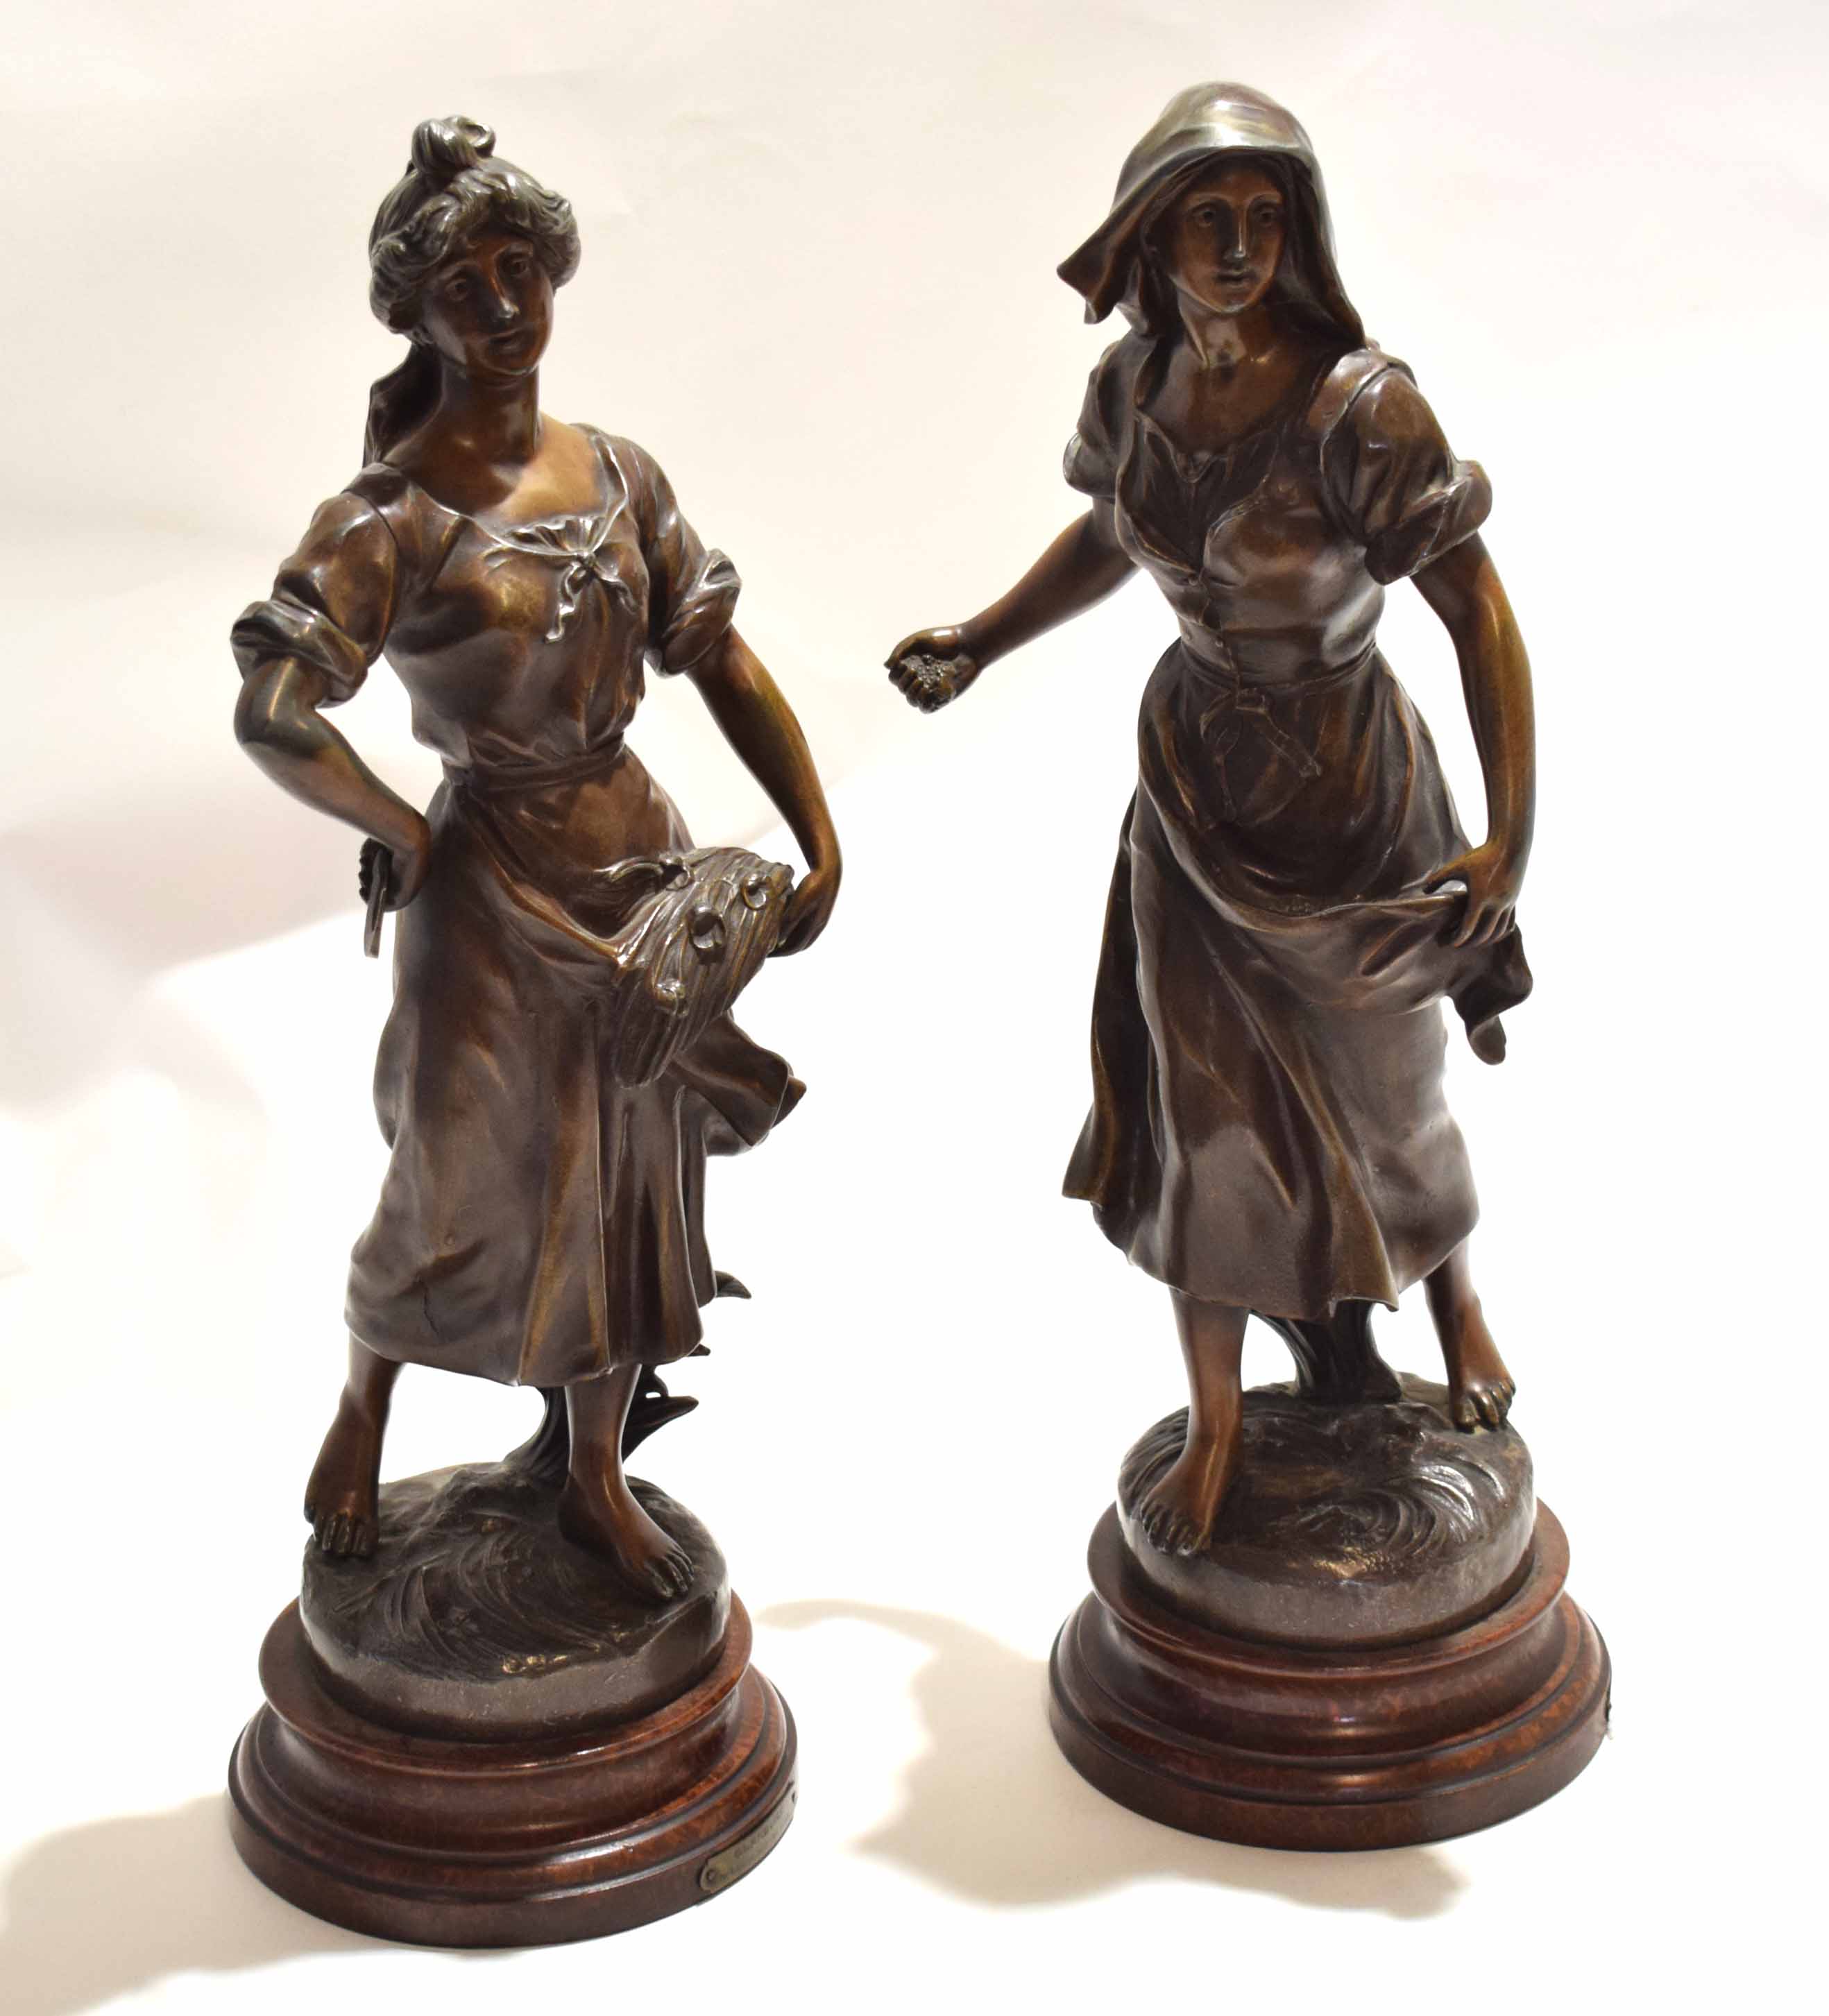 Pair of late 19th century French bronzed spelter figures, one entitled "Glaneuse", the other